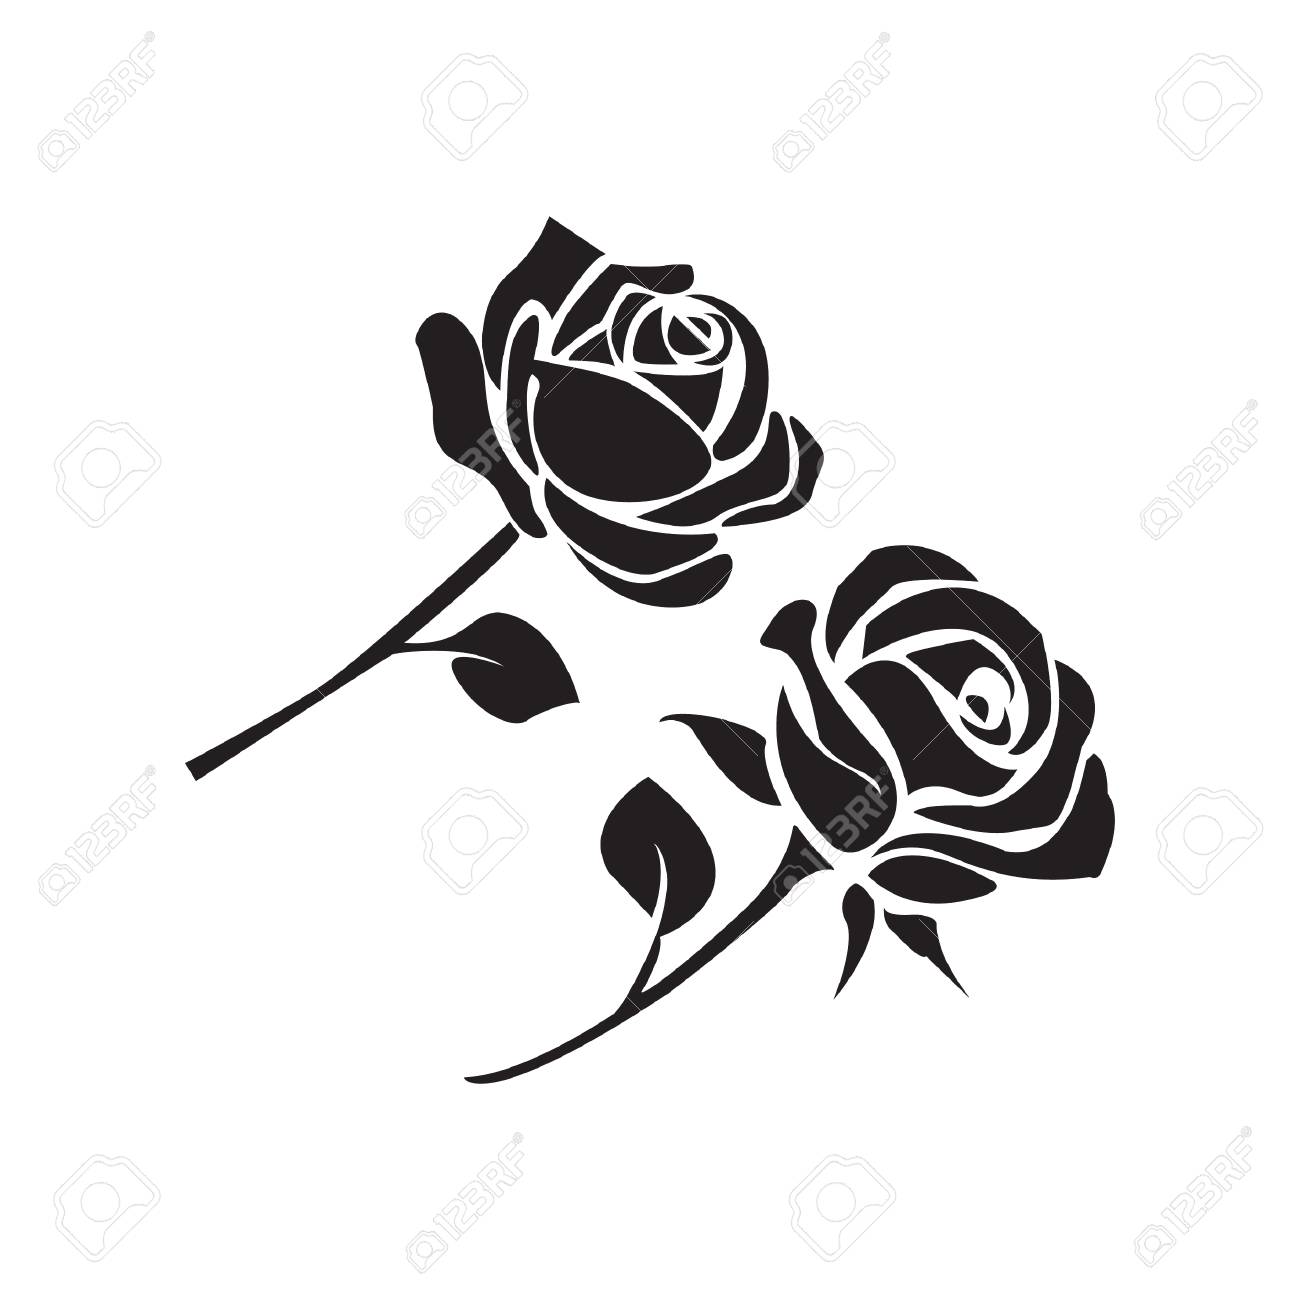 Rose icon. Set of roses silhouettes Stock image and royalty-free 